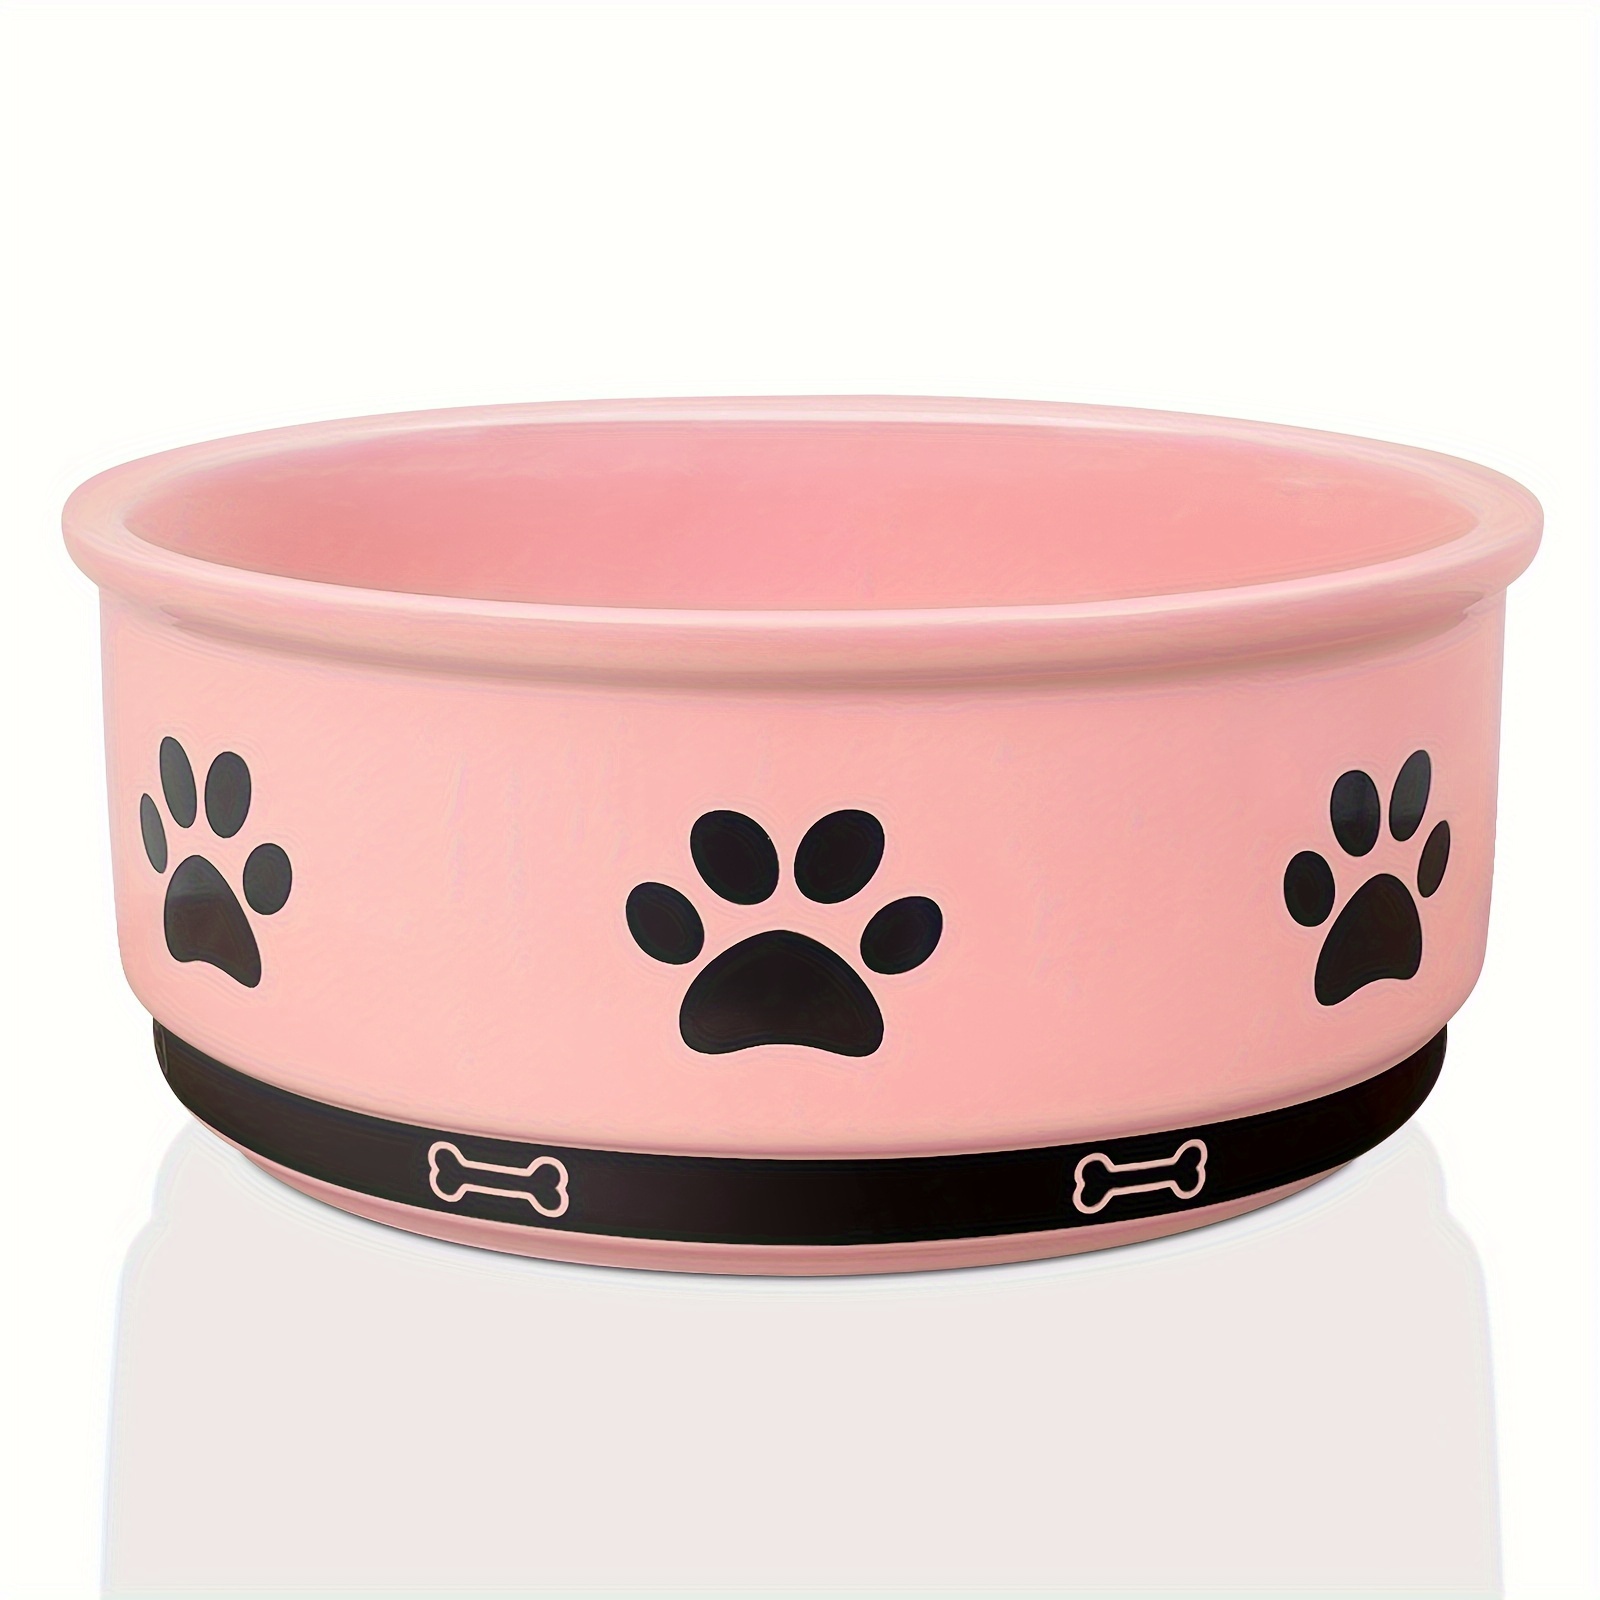 

Ceramic Pet Bowl For Dogs And Cats, Weighted Non-slip Dog Bowls Food And Water Dish, Durable Pets Feeding Bowls Suitable For Small, Medium, And Large Dogs Pet Products